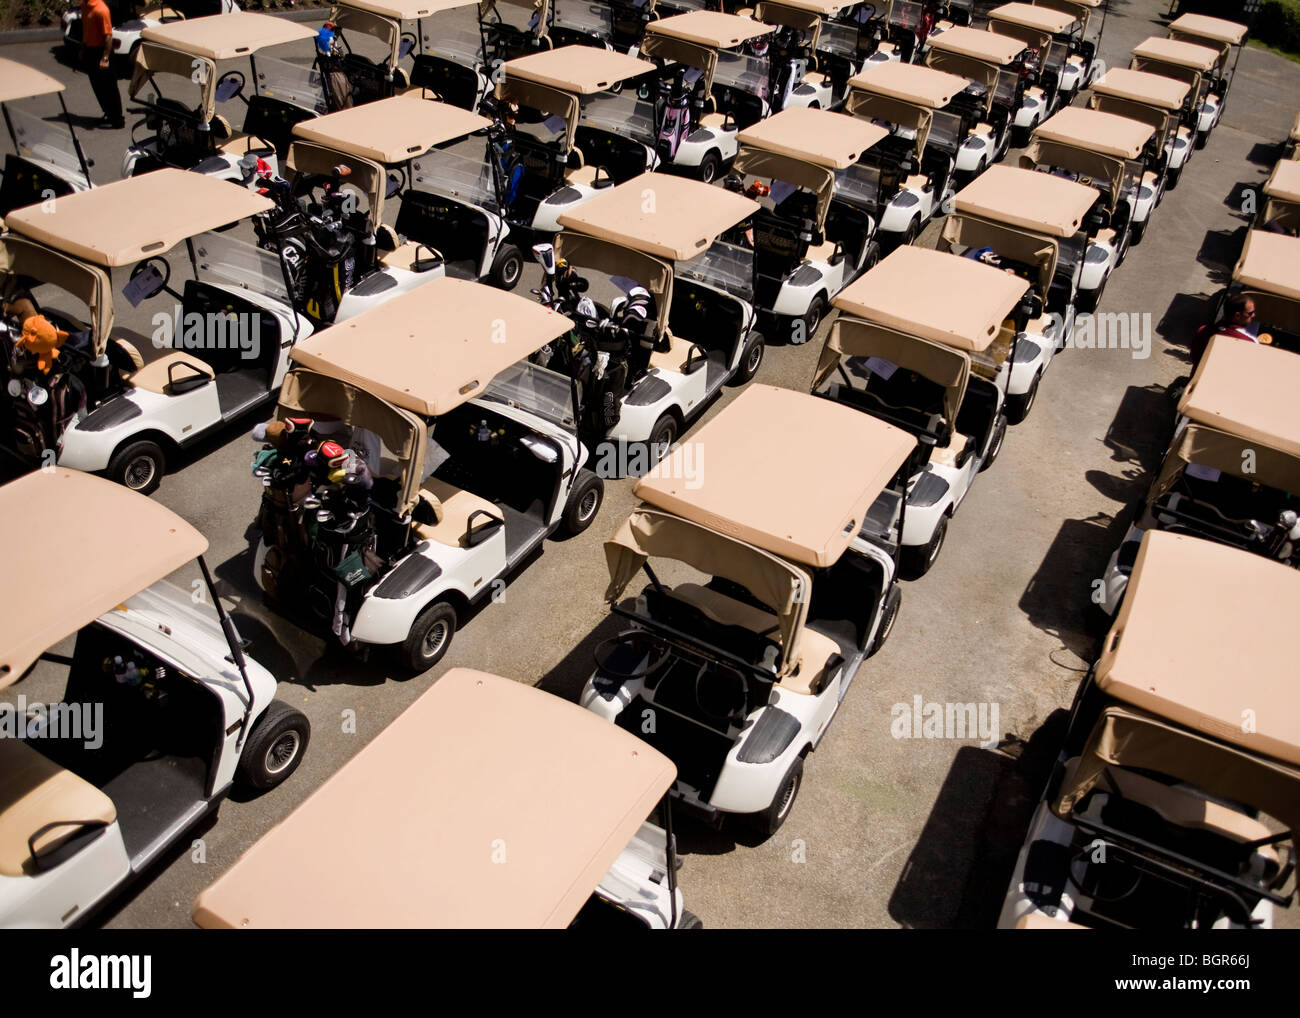 Golf carts lined up Stock Photo